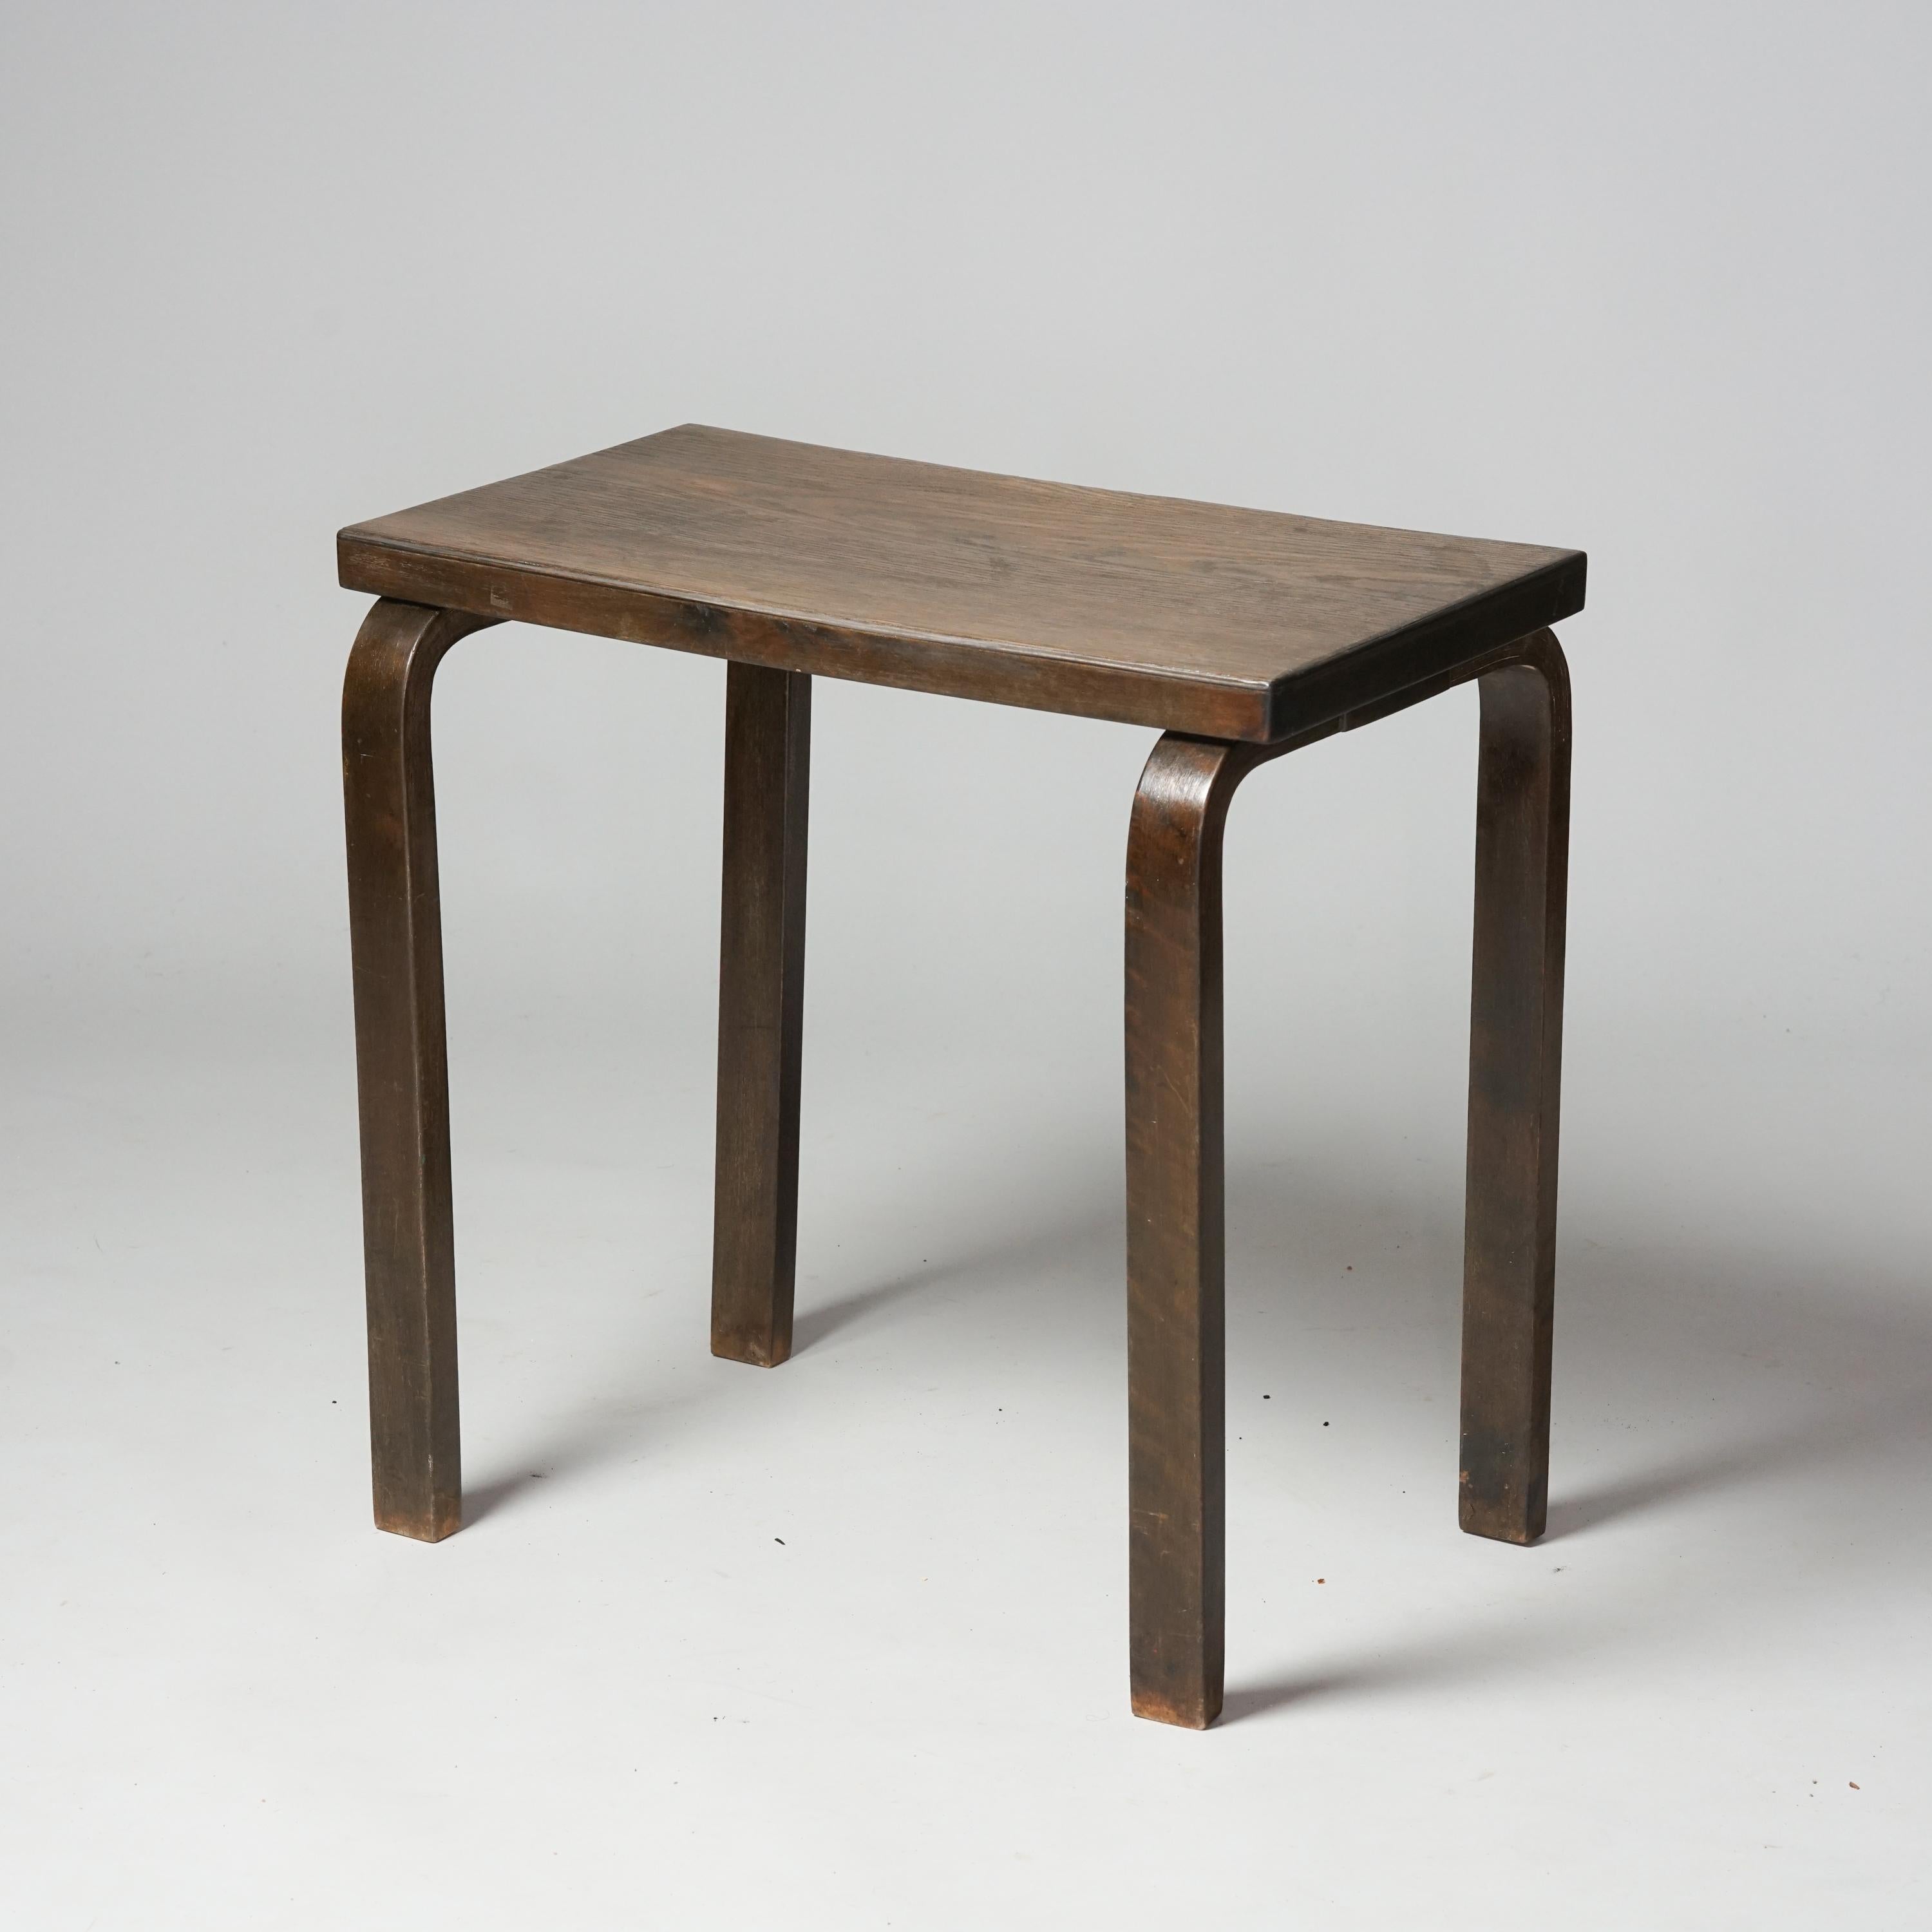 Side table, designed by Alvar Aalto, manufactured by Oy Huonekalu- ja Rakennustyötehdas Ab, 1930s. Stained birch frame with oak veneer table top. Good vintage condition, minor patina consistent with age and use. 

Alvar Aalto (1898-1976) is probably